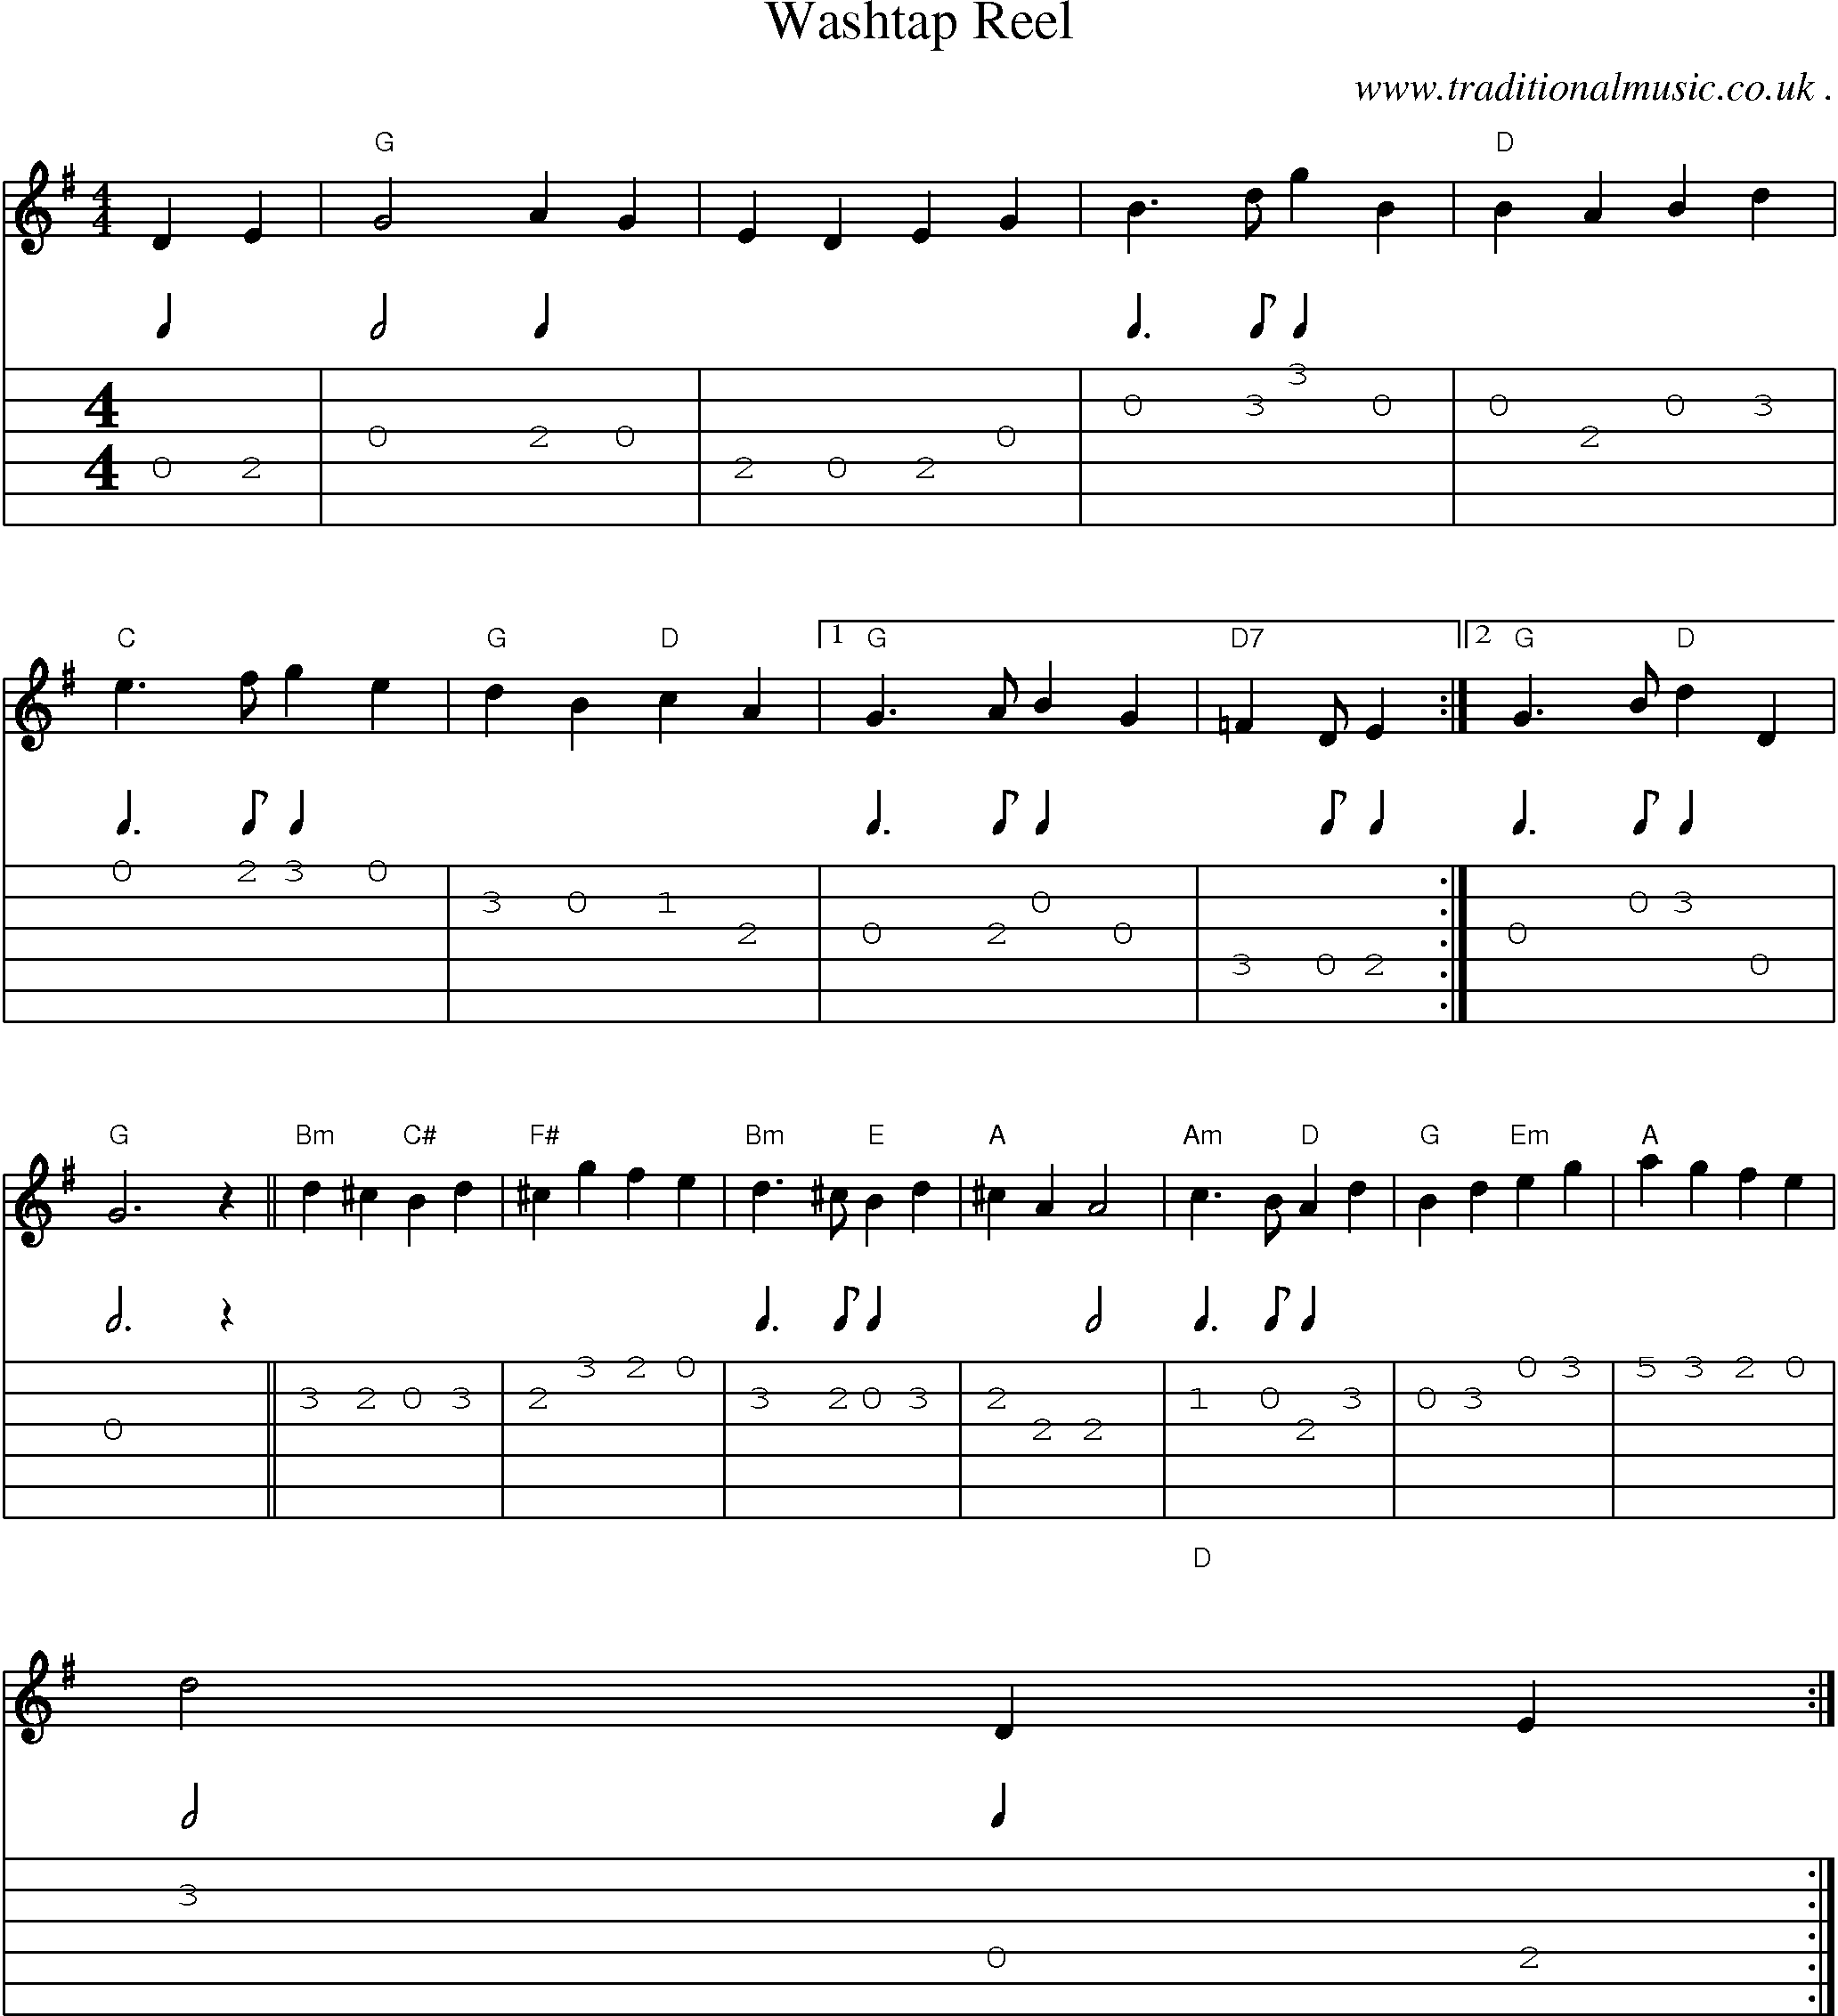 Sheet-Music and Guitar Tabs for Washtap Reel